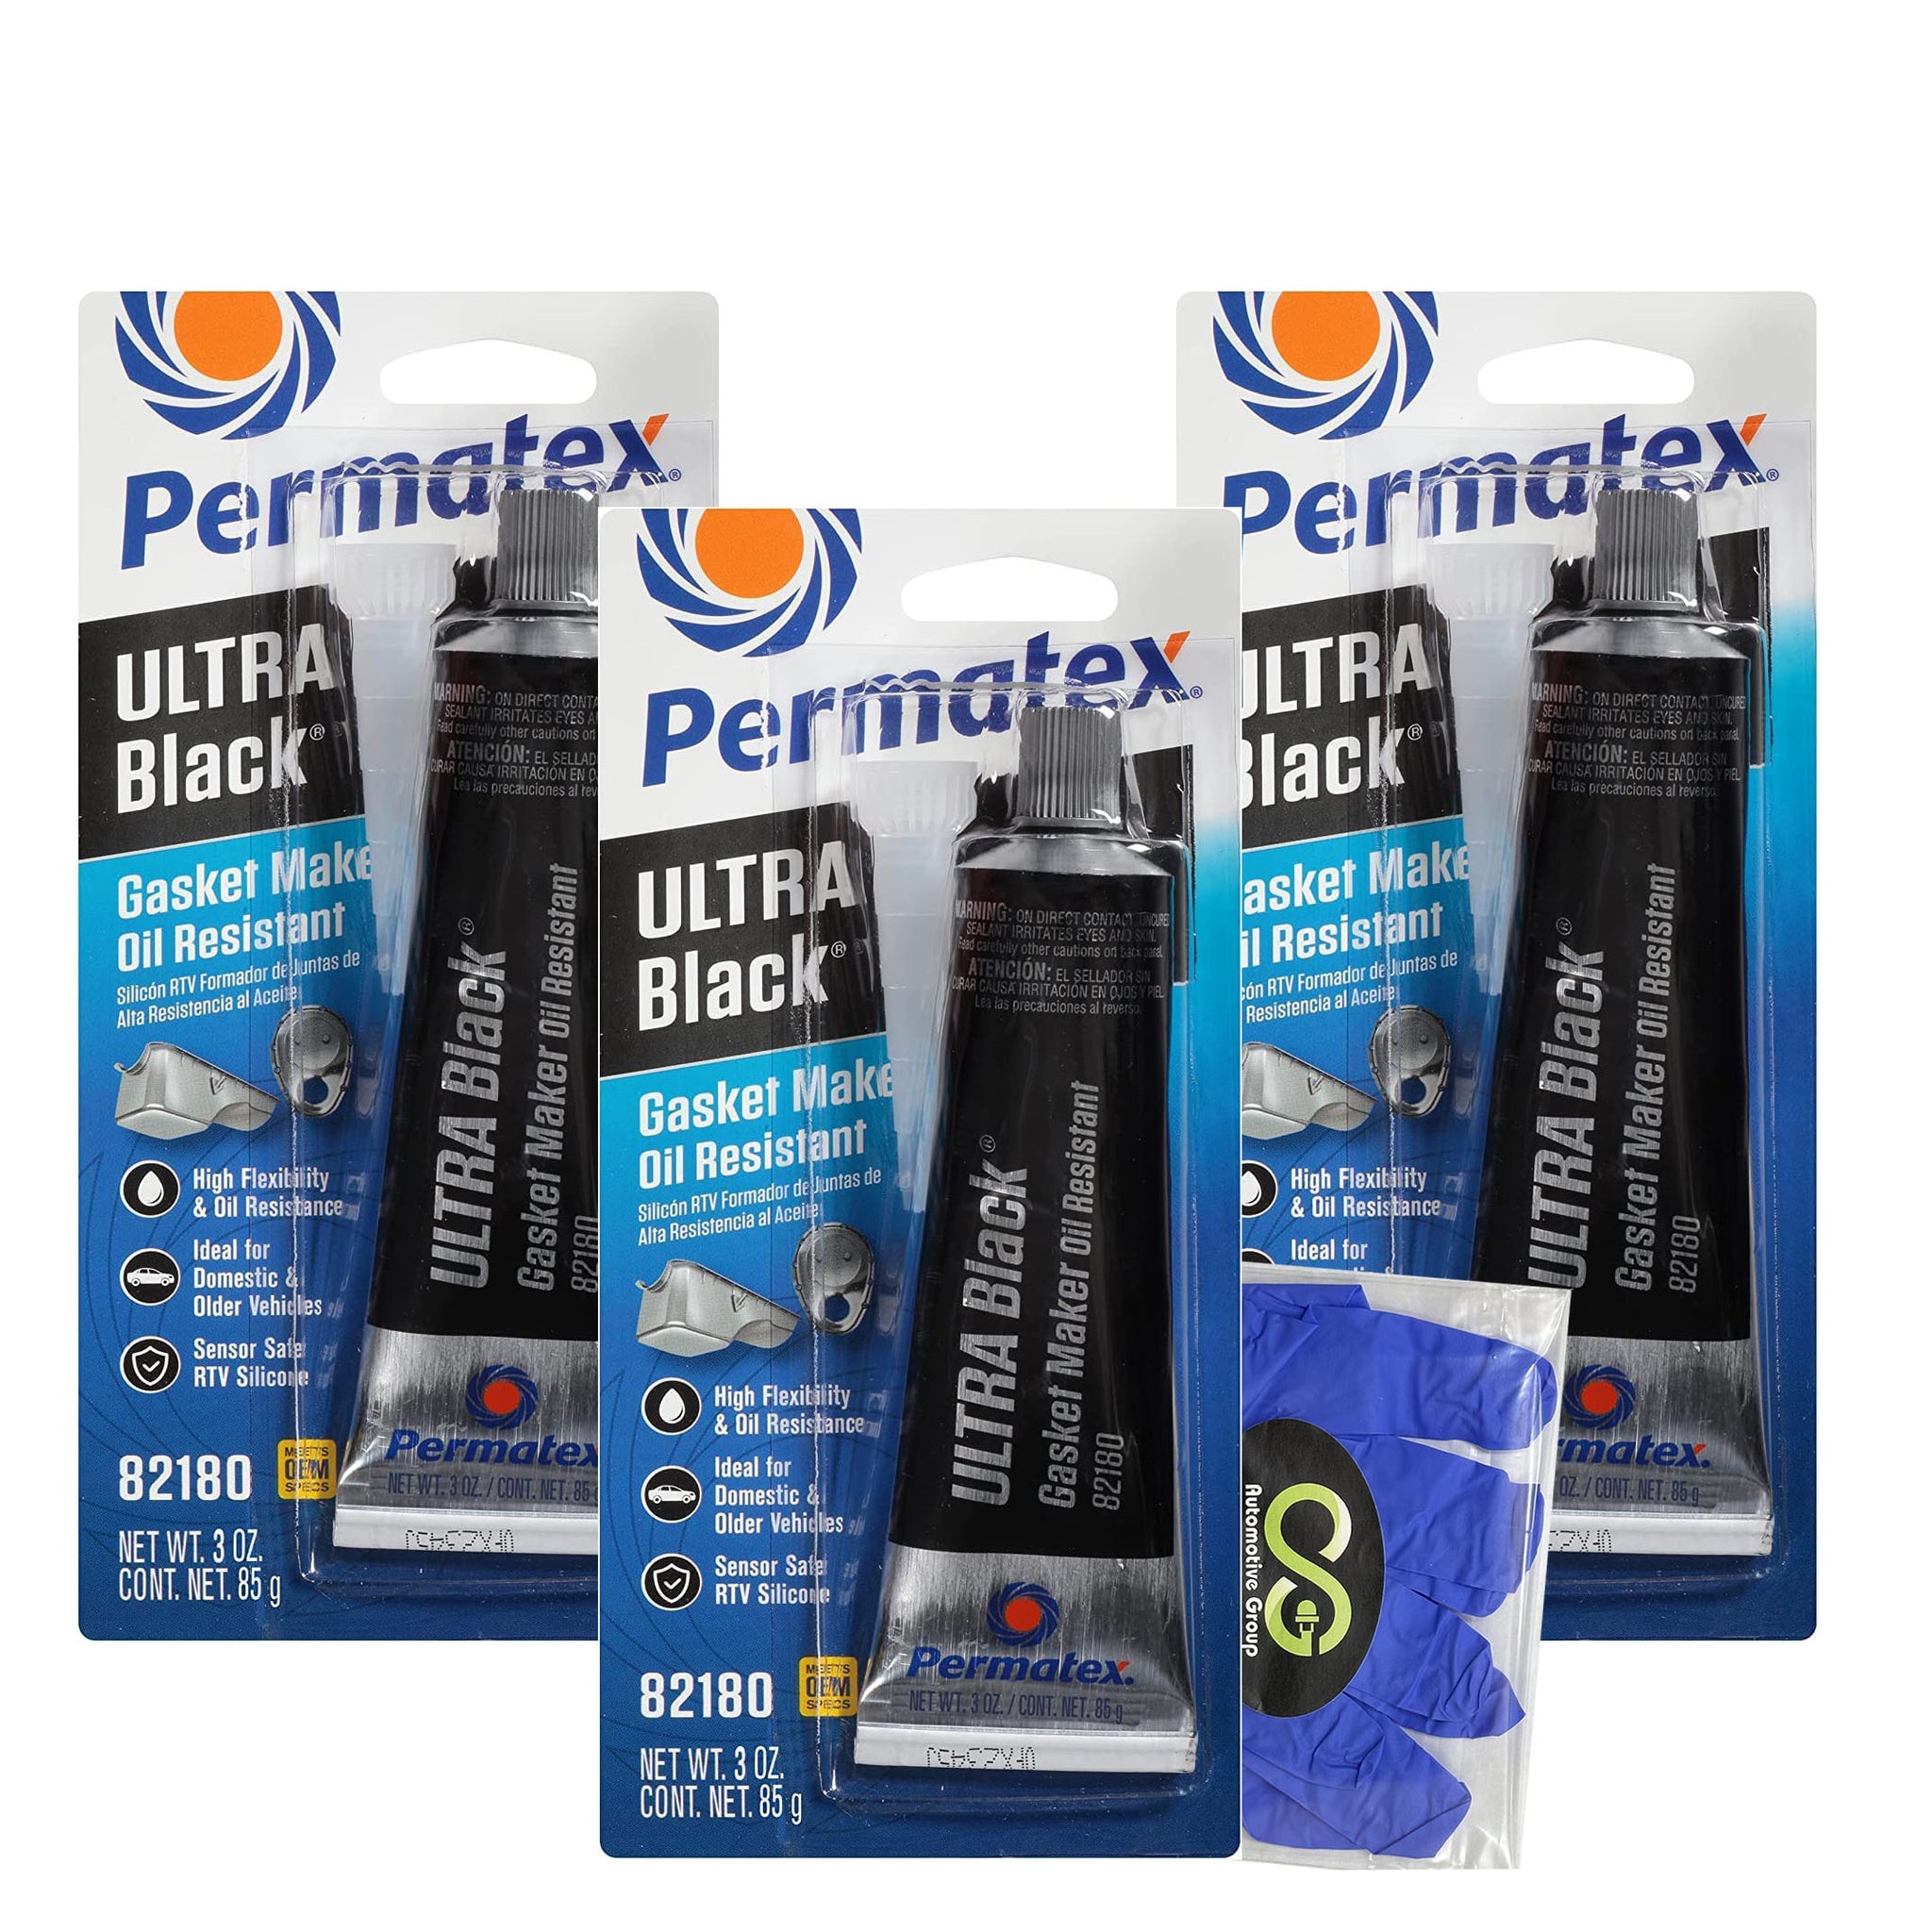 Permatex Silicone RTV Gasket Maker Ultra Black 82180 3.35Oz - Pack of 3 with Biodegradable Disposable Gloves Bundle (5 Items)